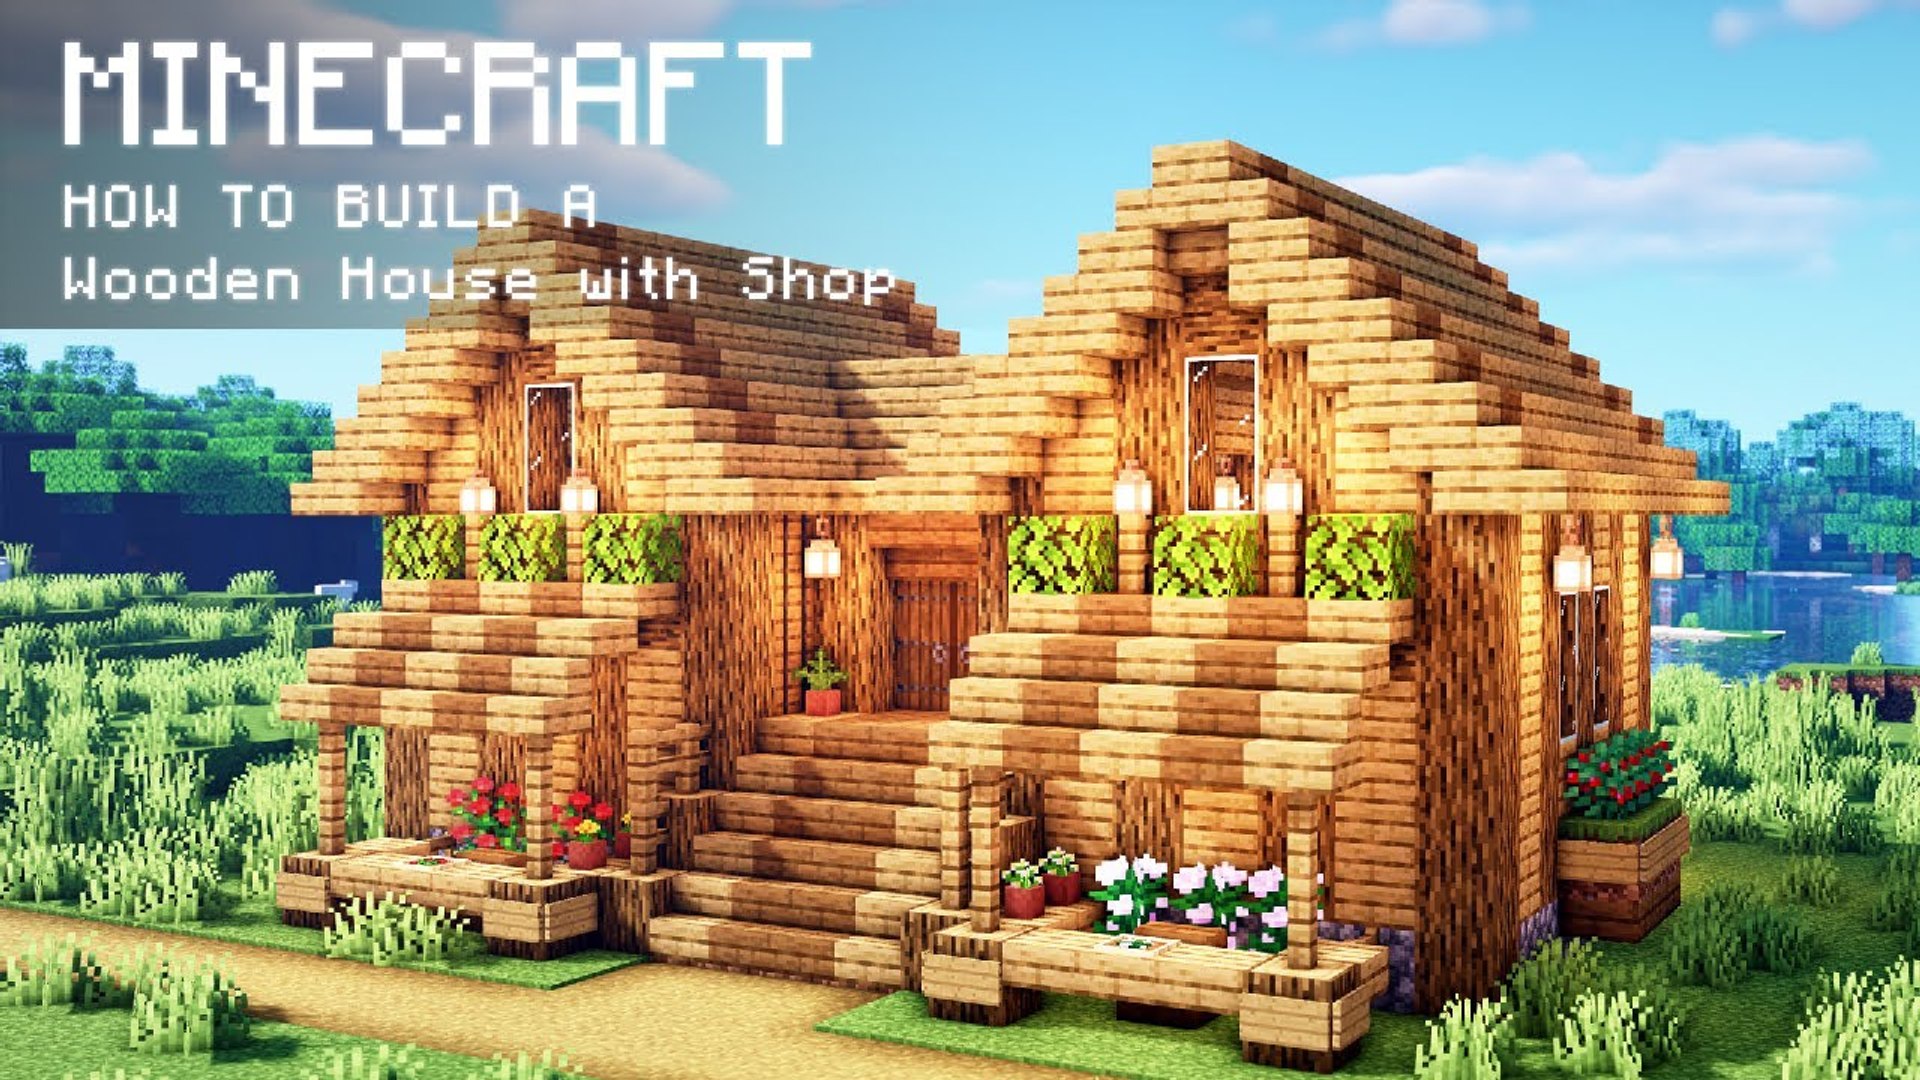 Minecraft- How To Build a Wooden House with Shop